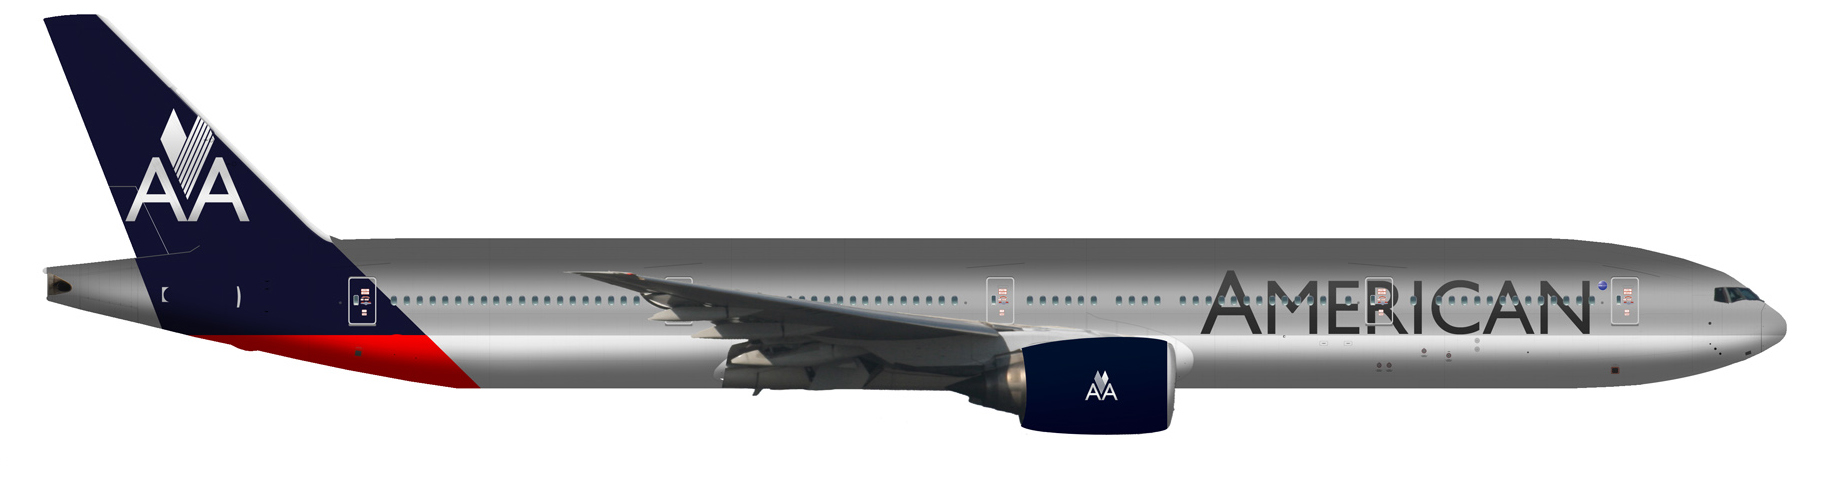 Download UPDATED: American Airlines Set to Get a New Livery Soon - AirlineReporter : AirlineReporter